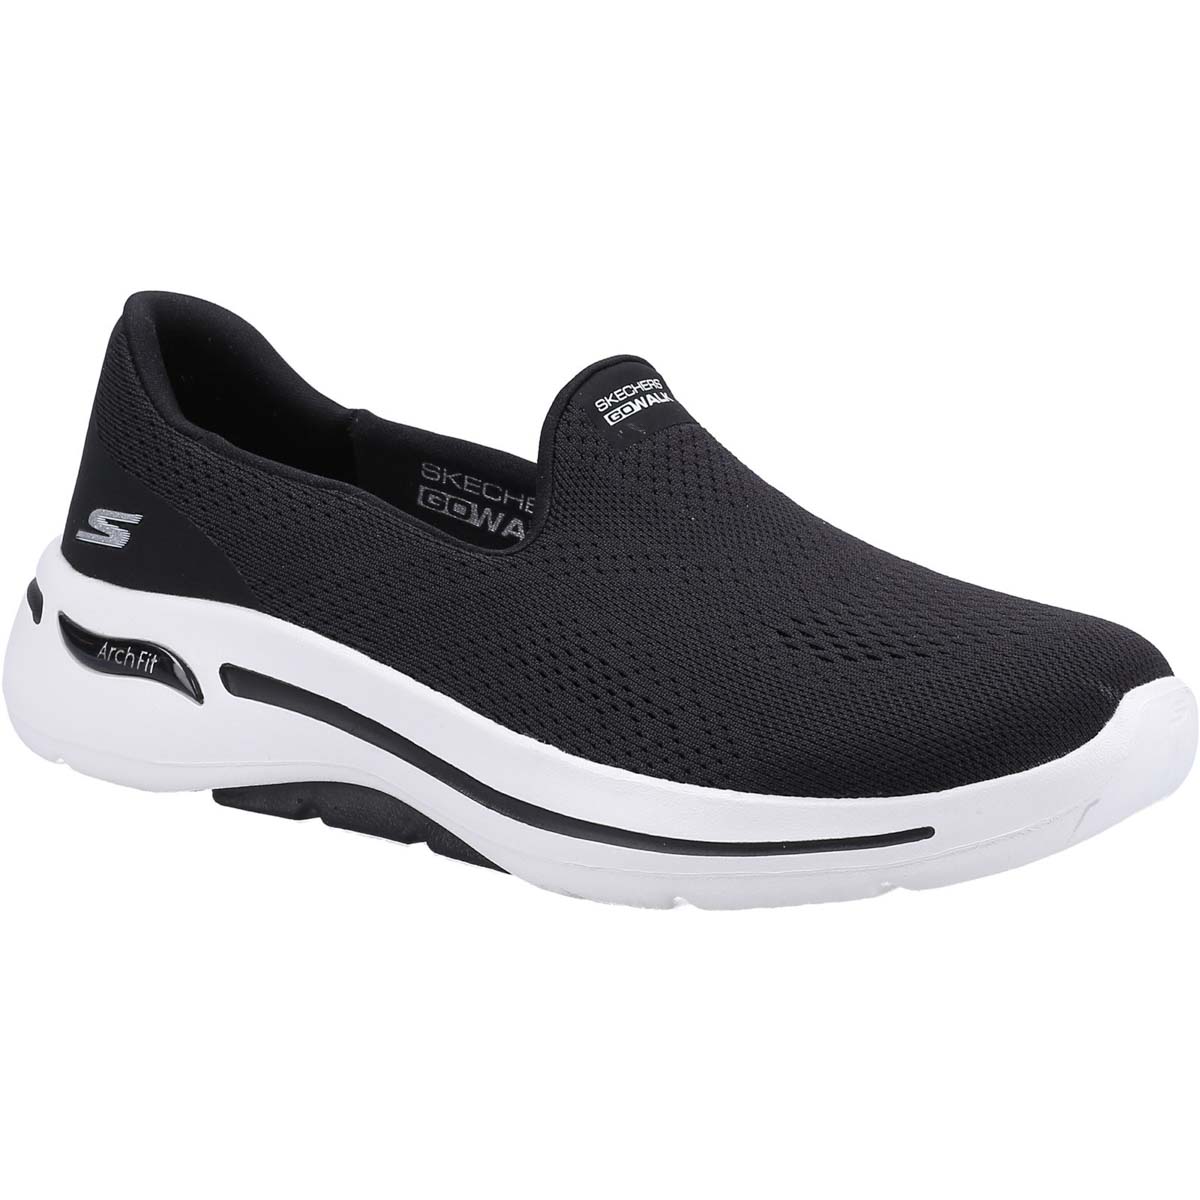 Skechers Go Walk Arch Fit Imagined BLK Black Womens trainers